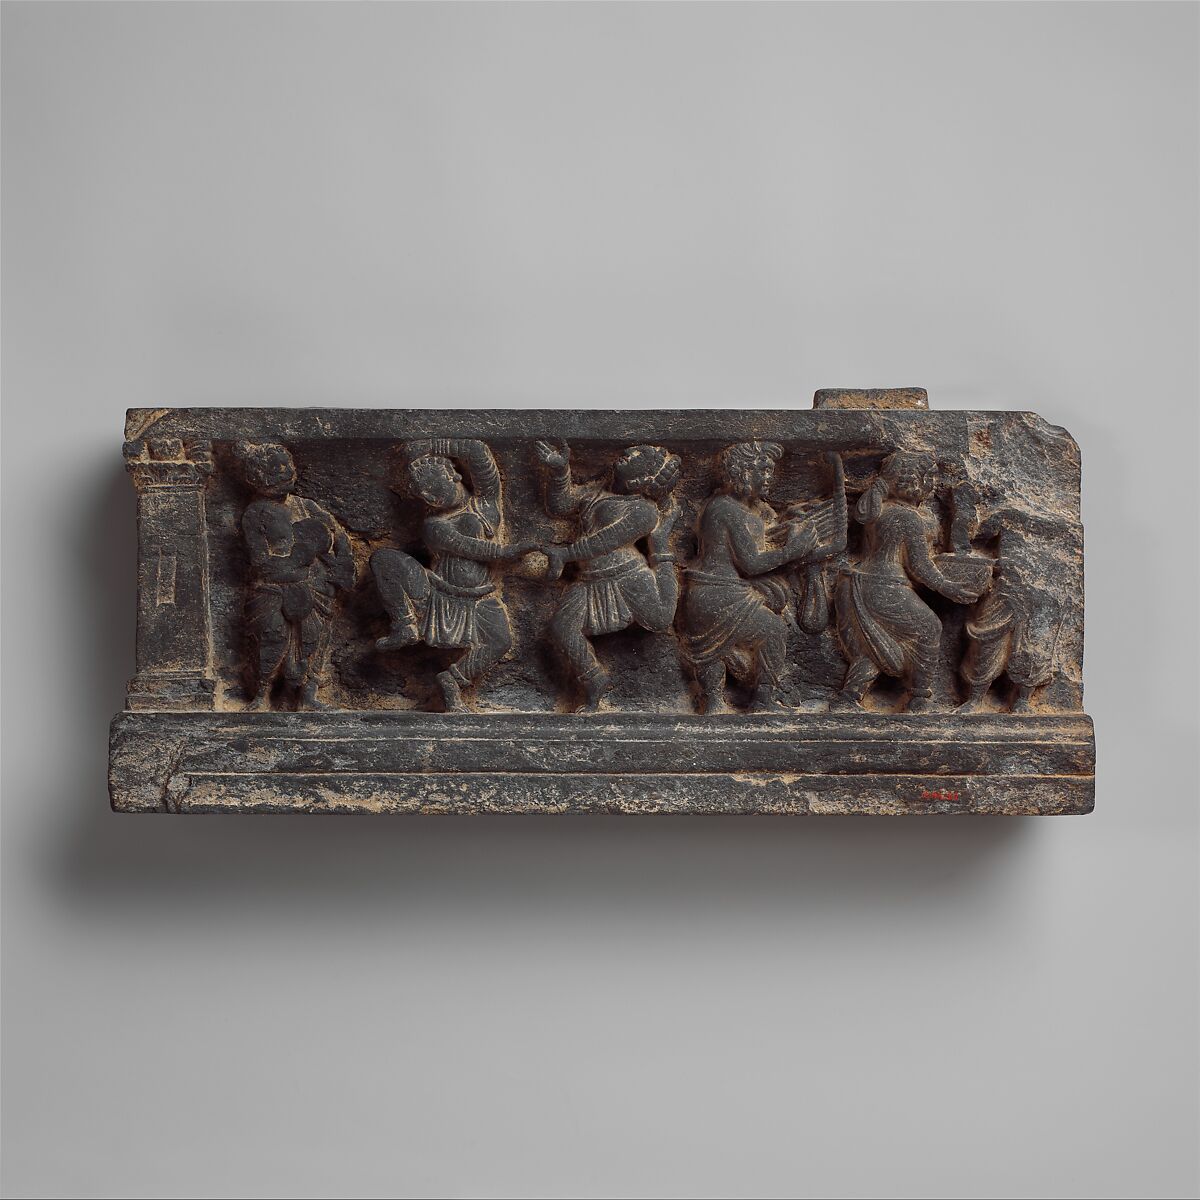 Stair Riser: Dionysian Scene with Musicians and Dancers, Schist, Pakistan (ancient region of Gandhara) 